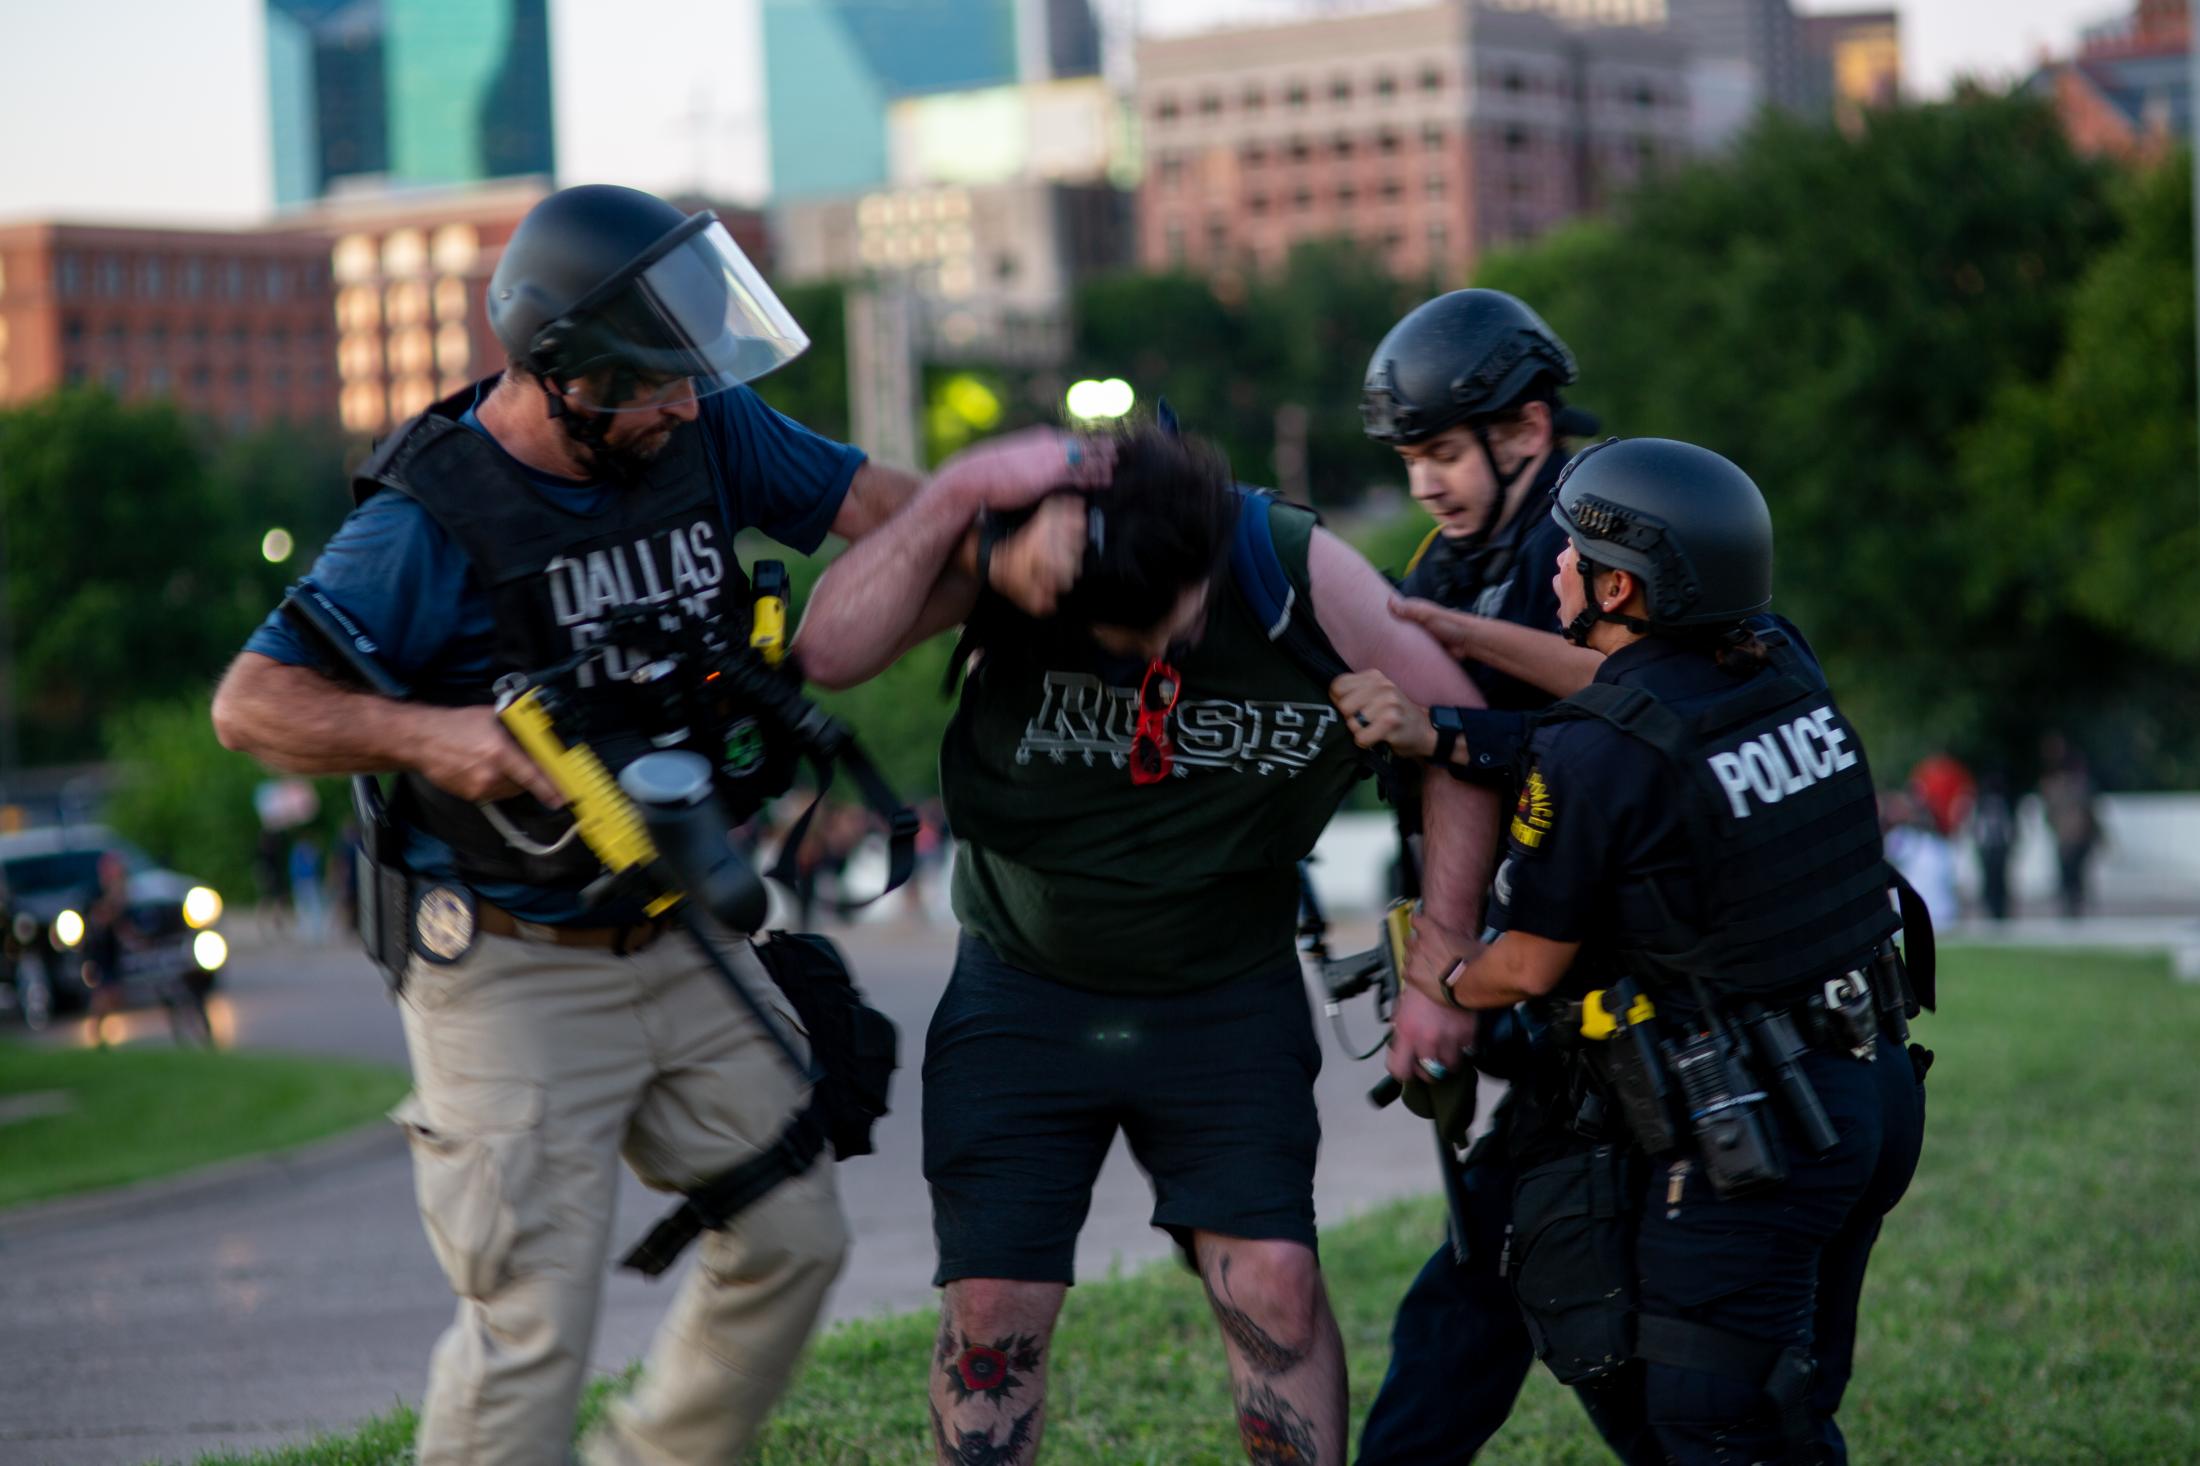 Unrest Dallas - Parker, (center) is grabbed by Dallas Police during the...